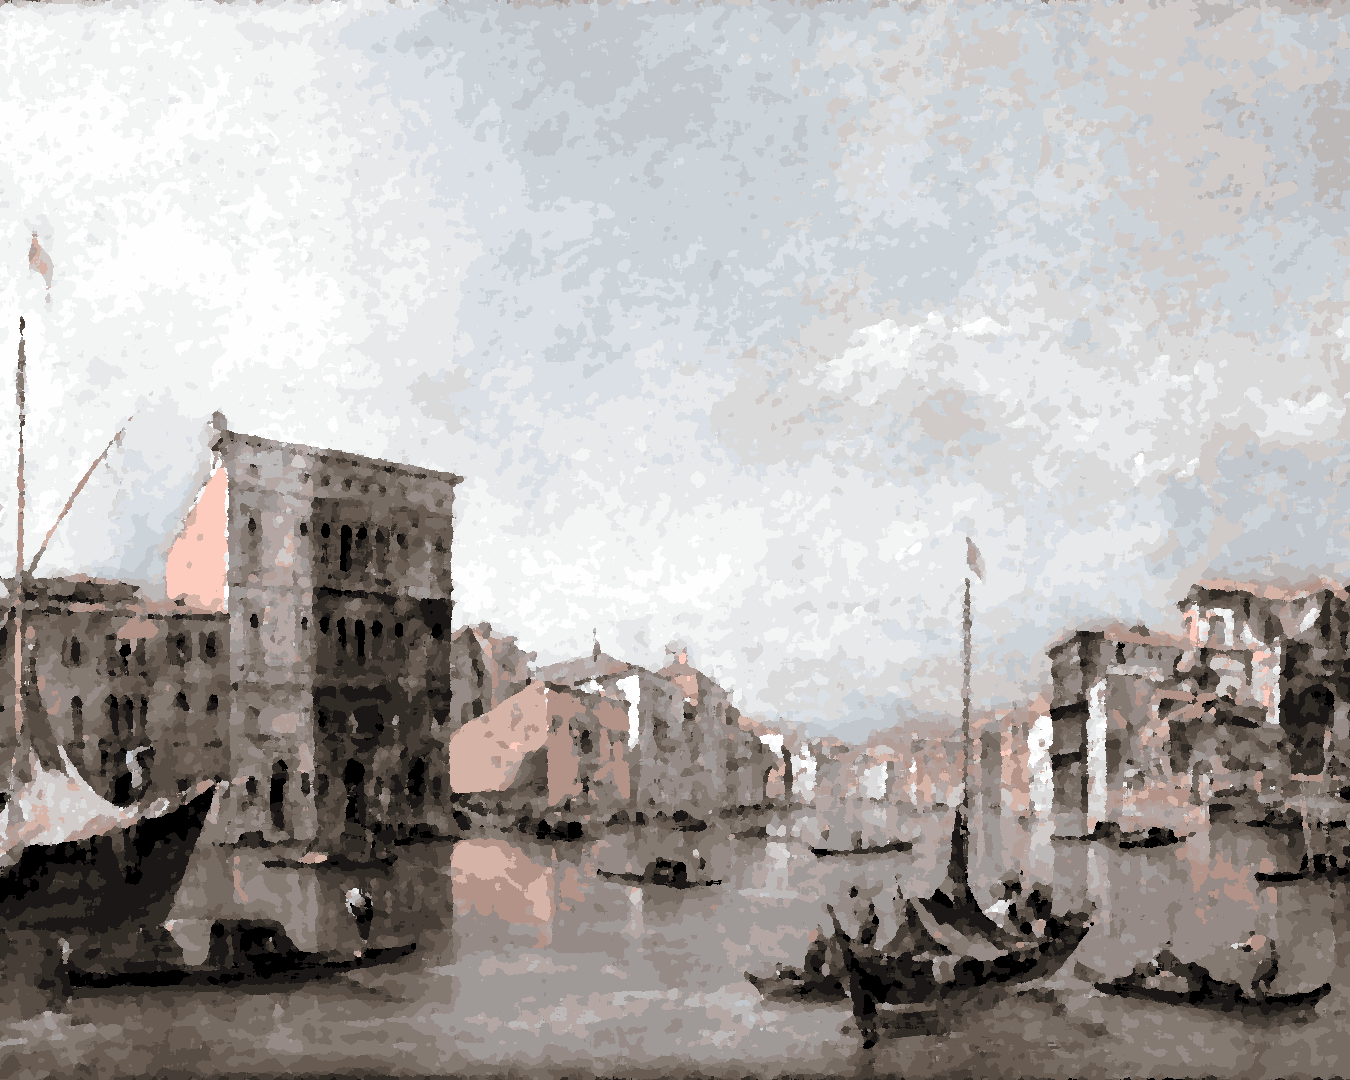 Venice, Italy Collection PD (31) - The Grand Canal by Francesco Guardi - Van-Go Paint-By-Number Kit